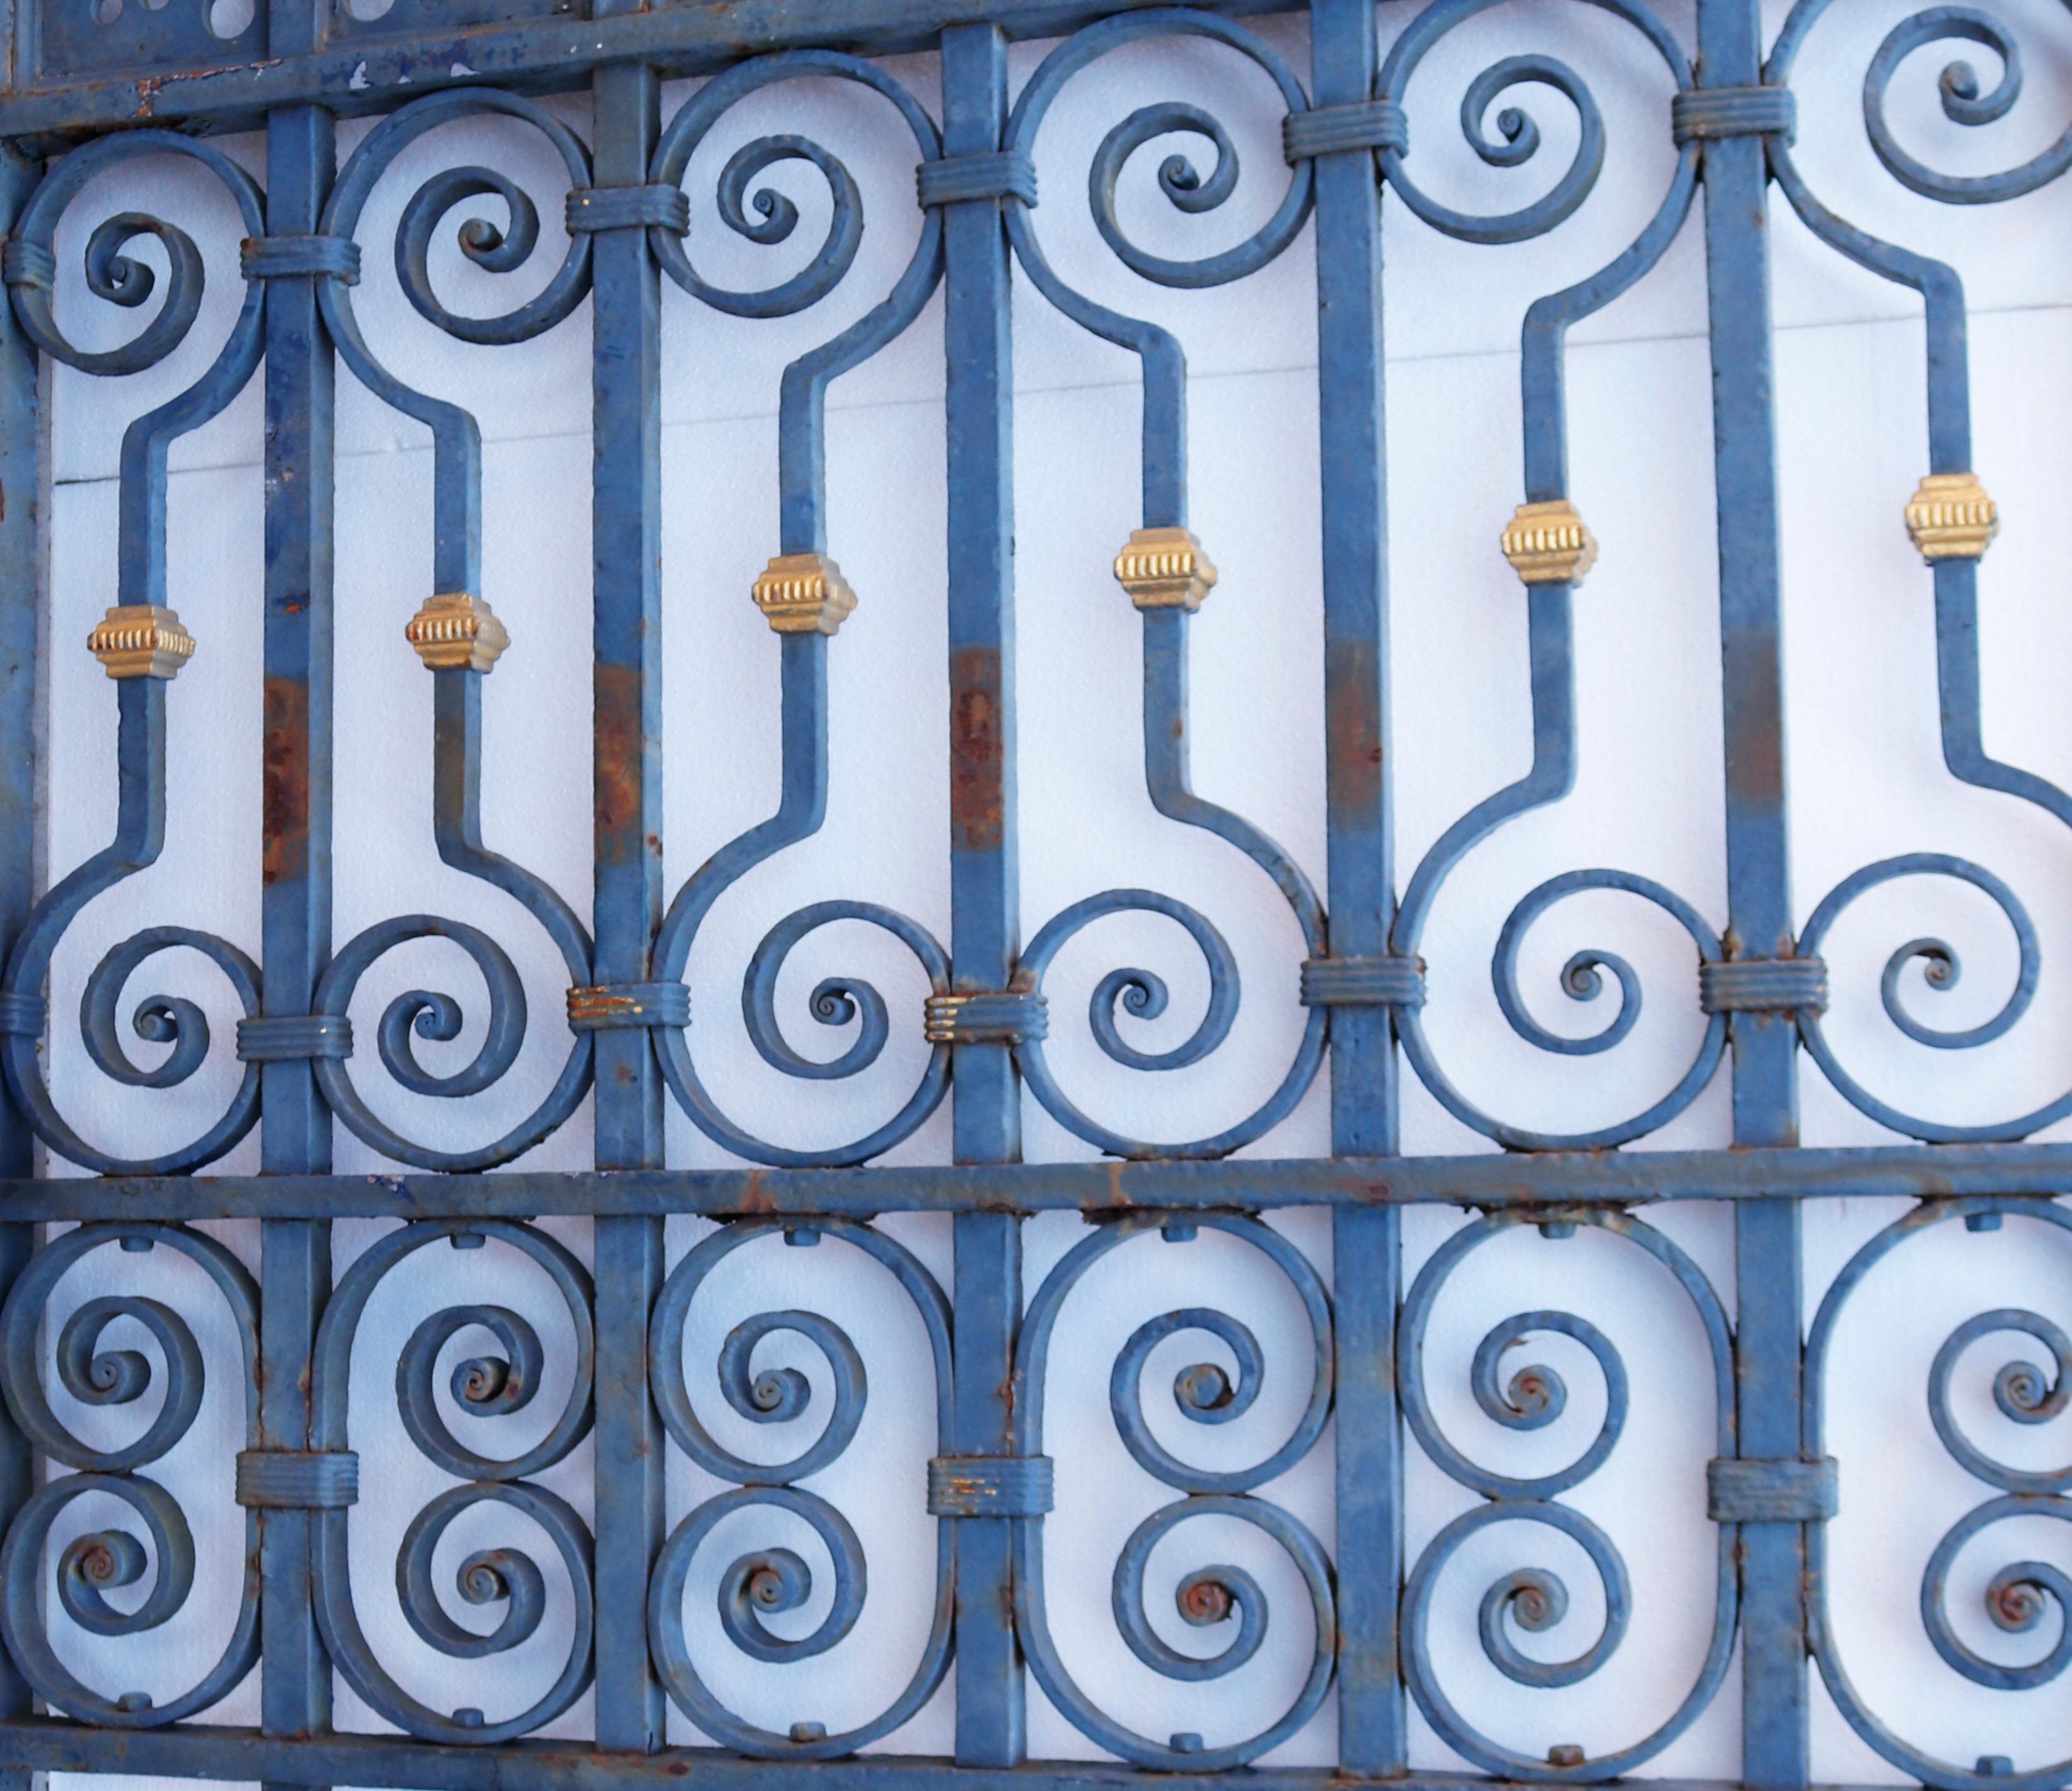 Victorian wrought iron gates dating from around 1880. These gates are similar in style to those situated at Foliejon Park, having come from a neighbouring estate.

These gates have come from a £16m house, demolished to make way for a new